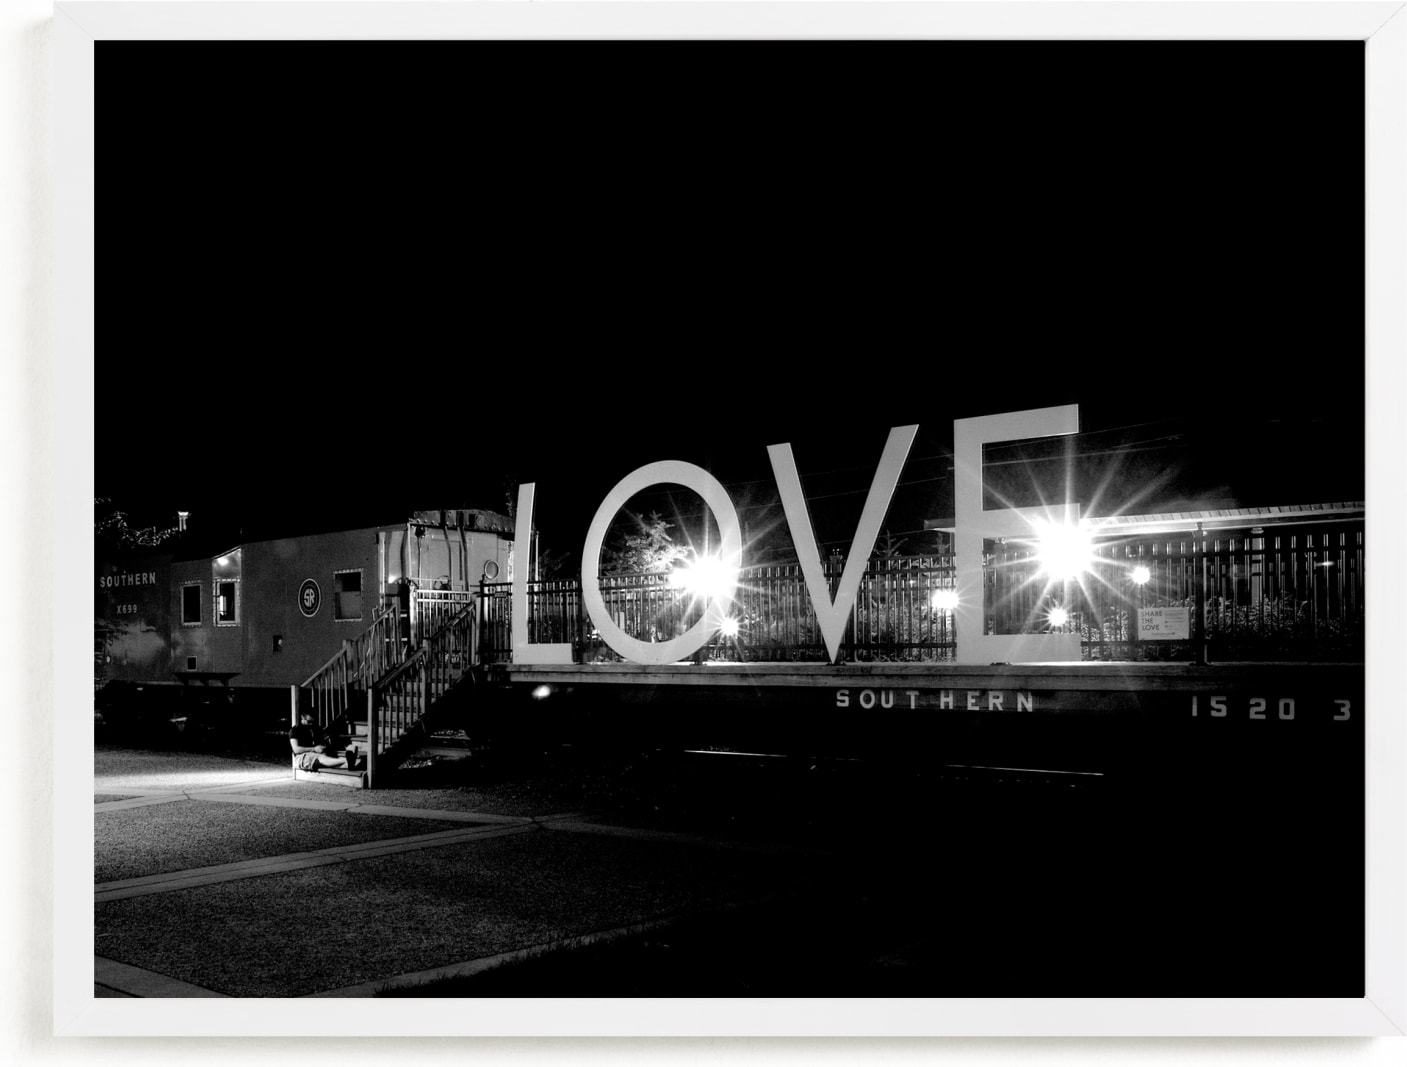 This is a black and white art by AMANDA LOMAX called Lovelight.